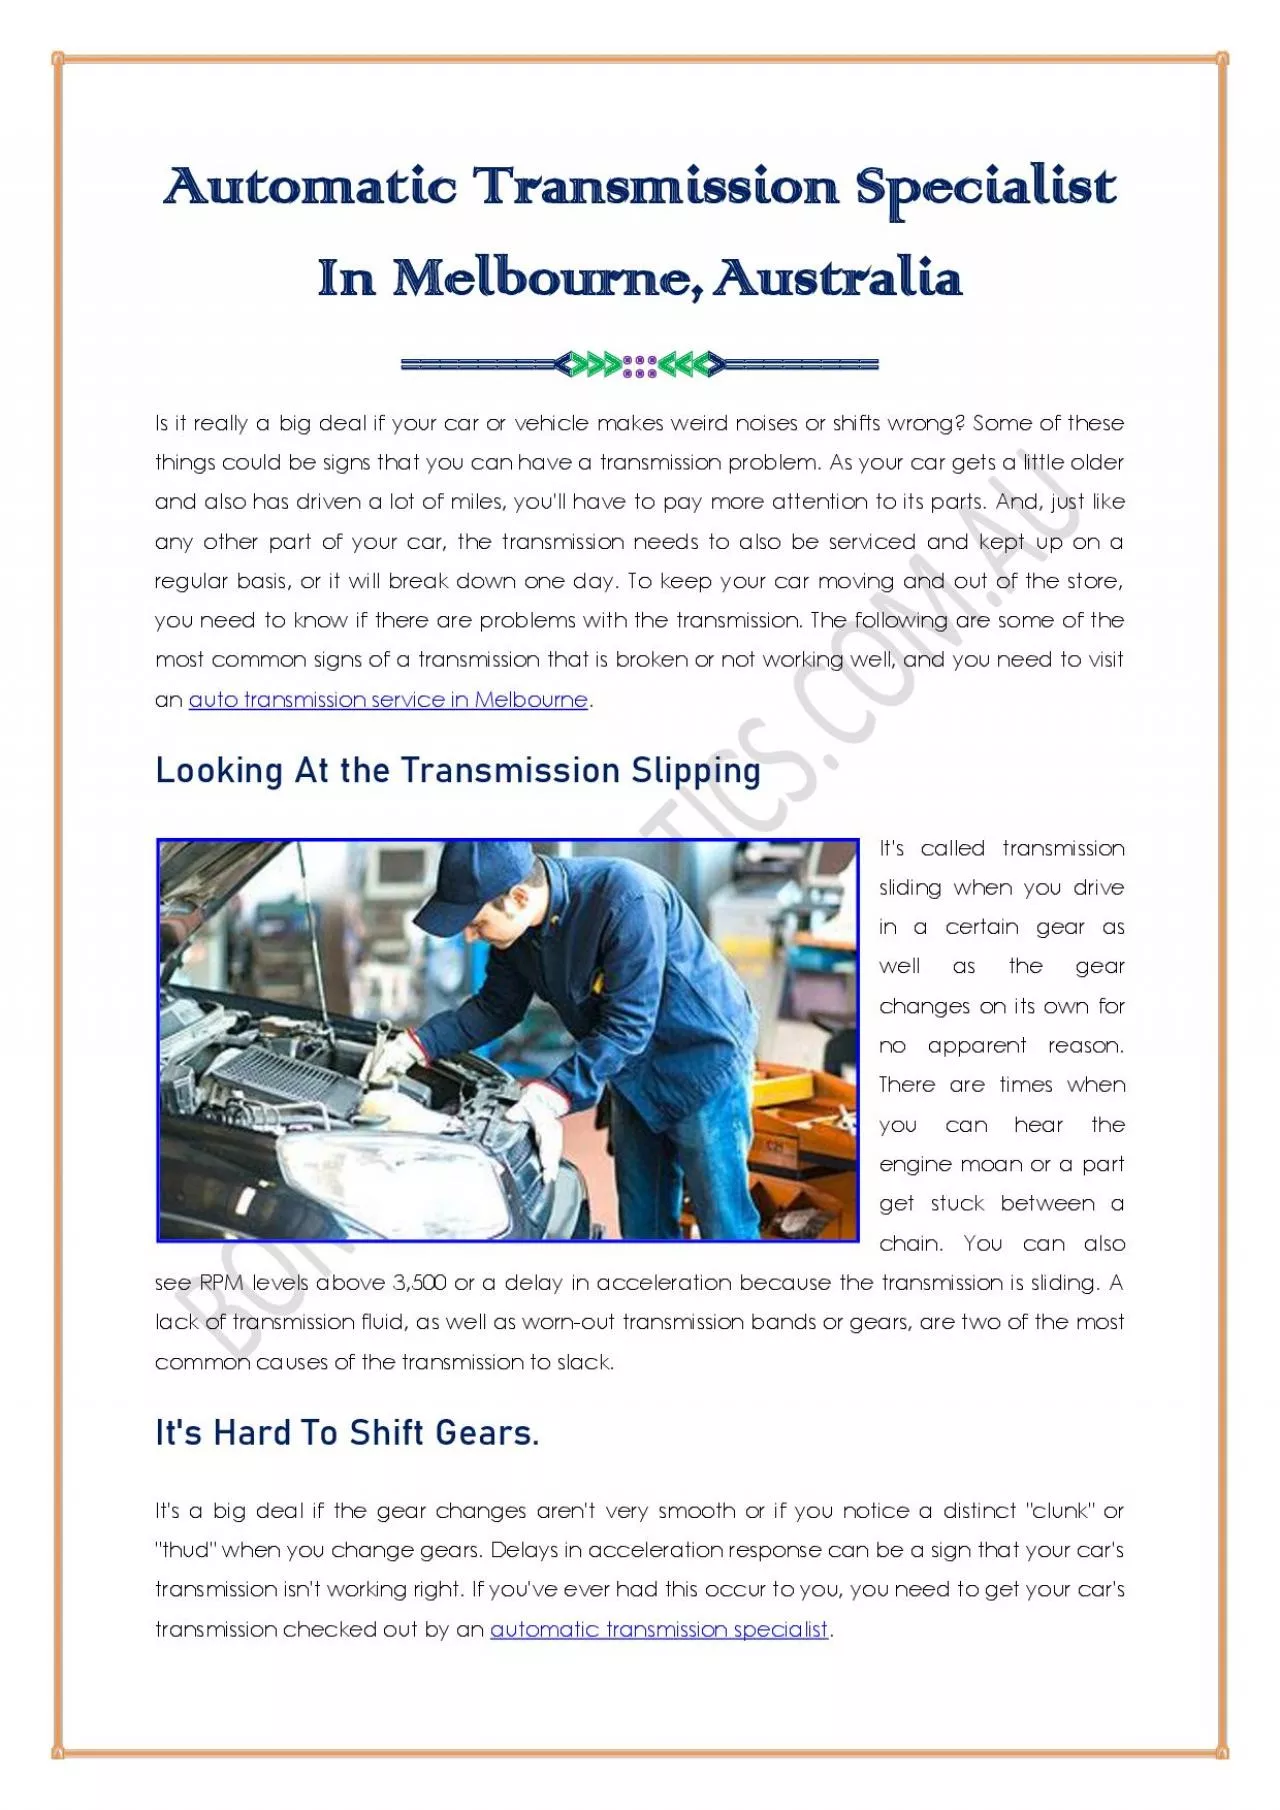 Automatic Transmission Specialist In Melbourne